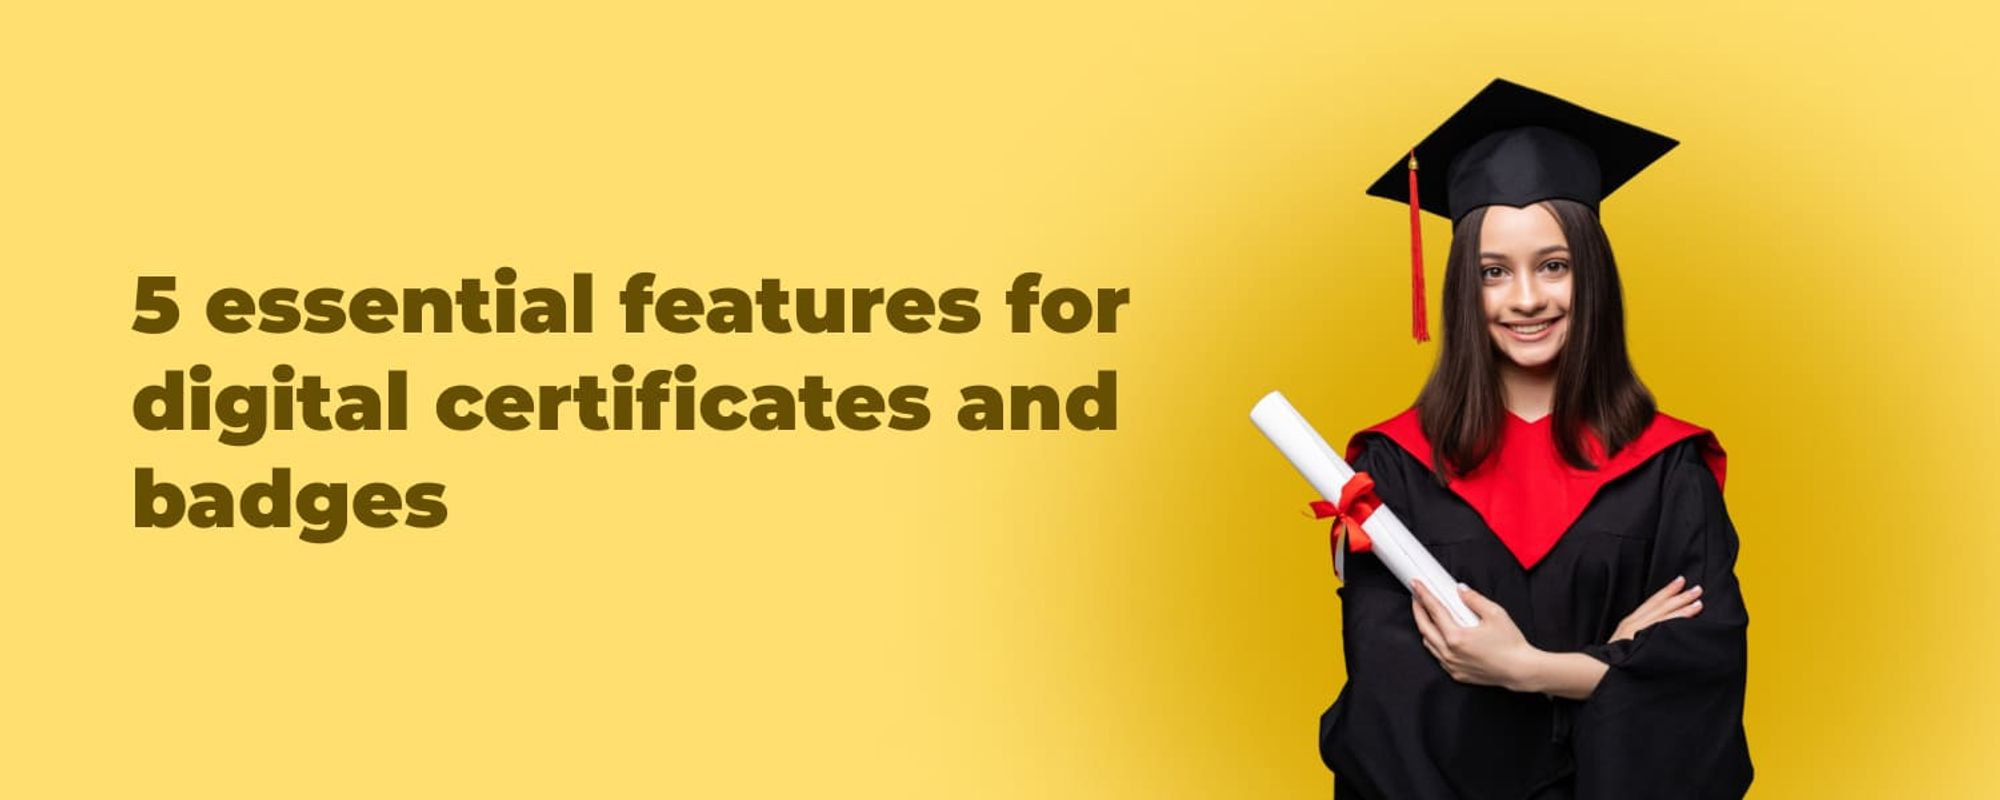 5 Essential Features for Digital Badges and Certificates